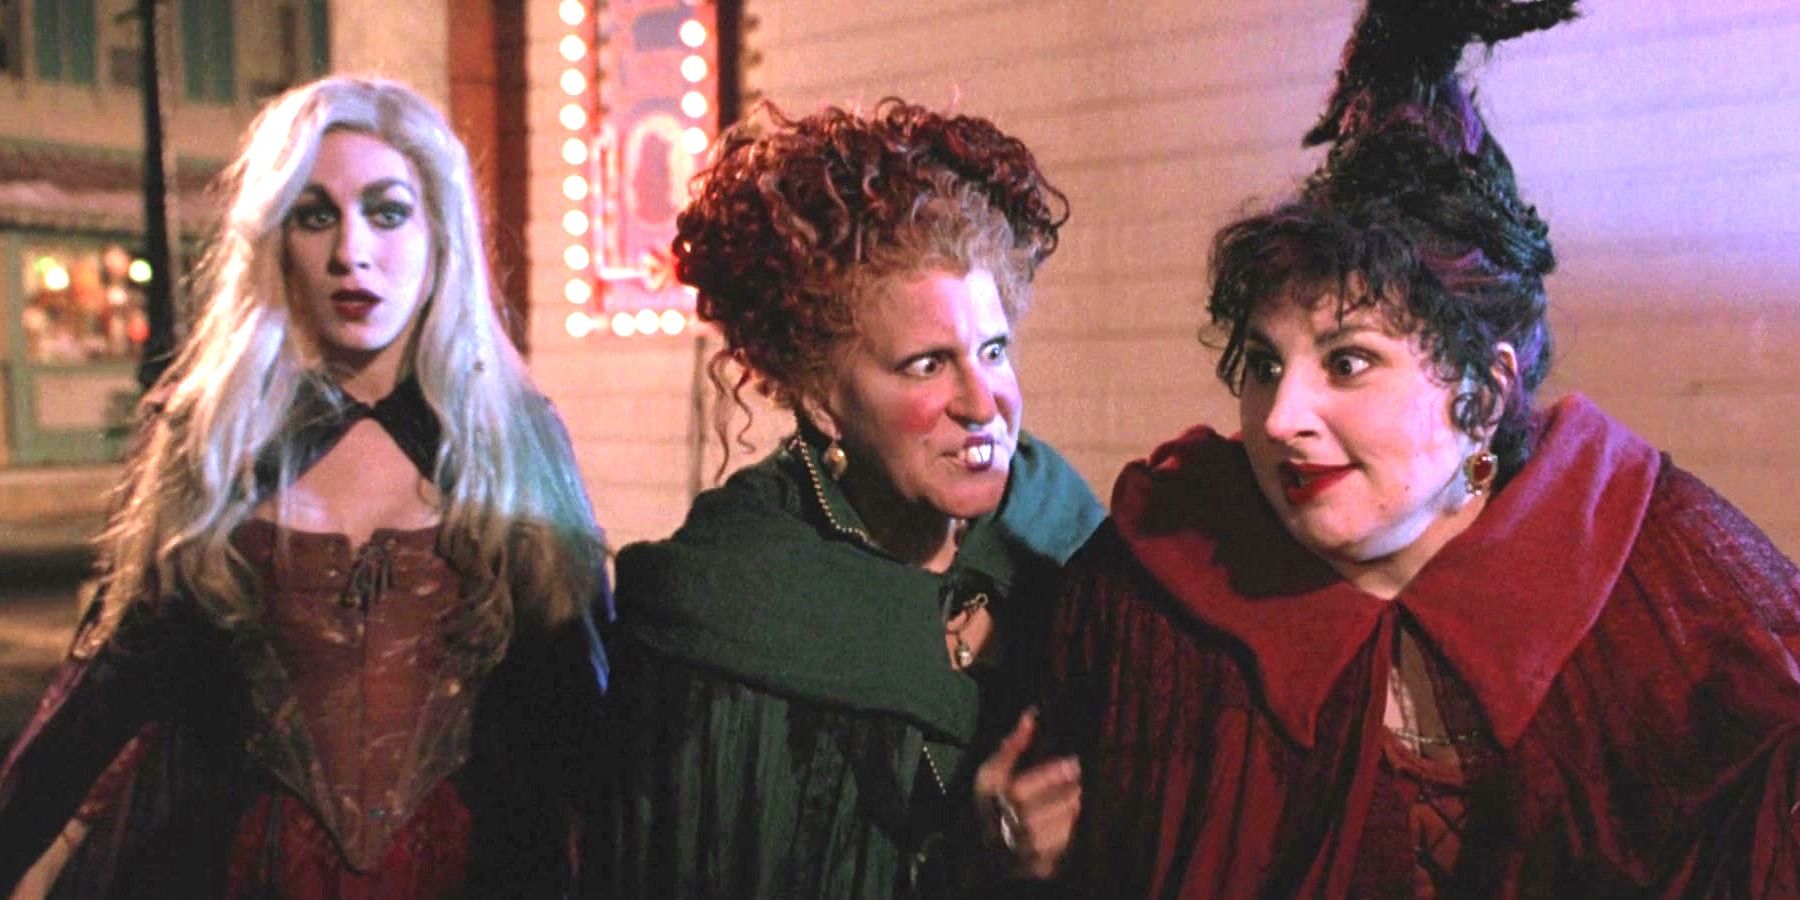 The Sanderson sisters roaming through the streets on Hocus Pocus